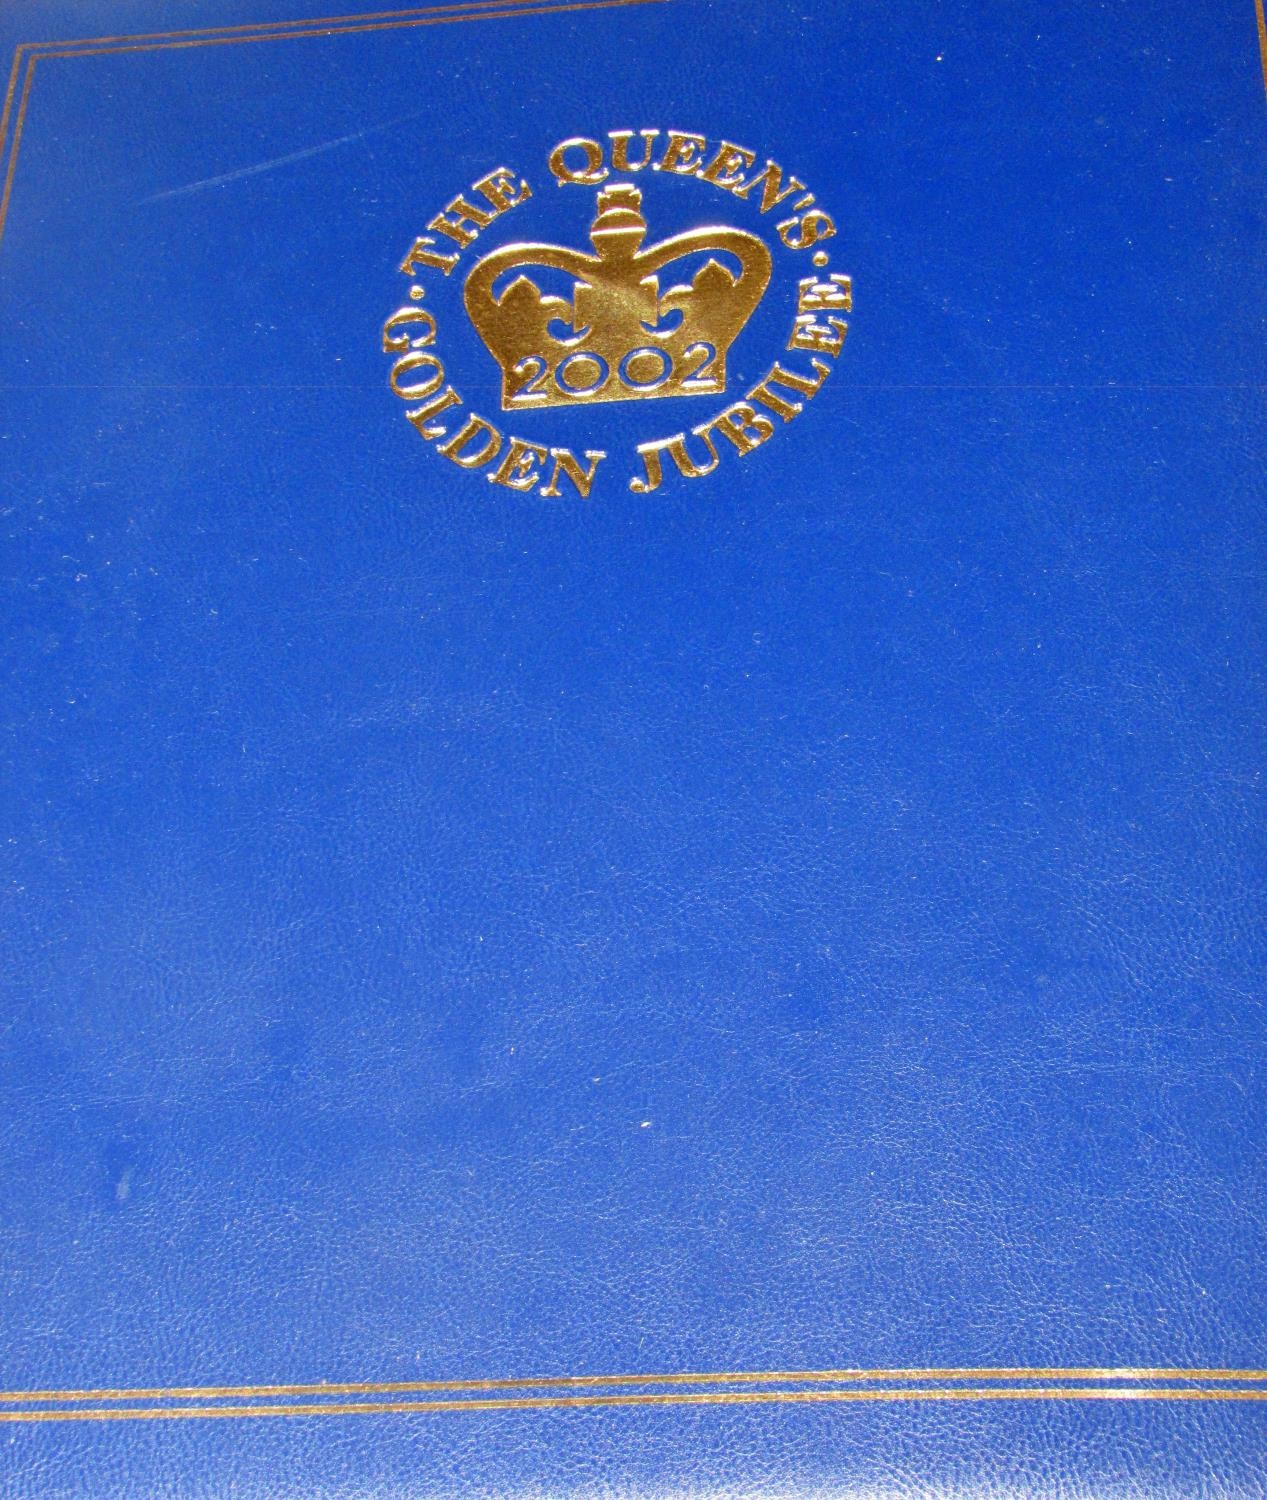 A folder of Coin First Day Covers 2002 to celebrate Queen Elizabeth II Golden Jubilee